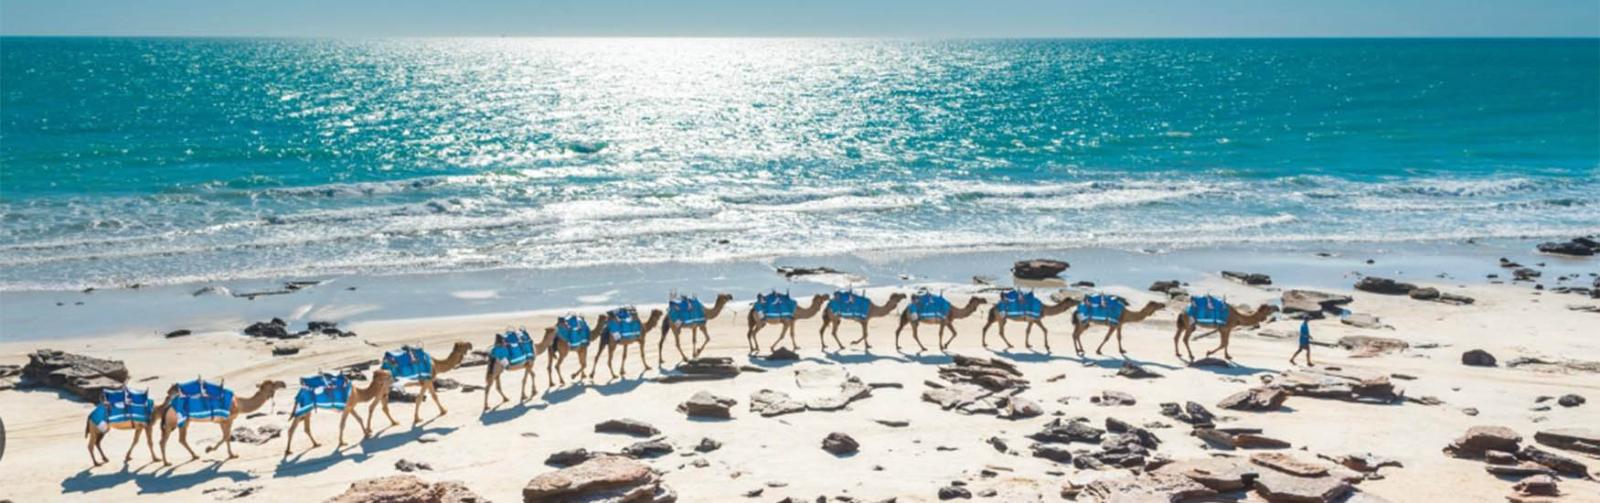 Cable beach tours by camel